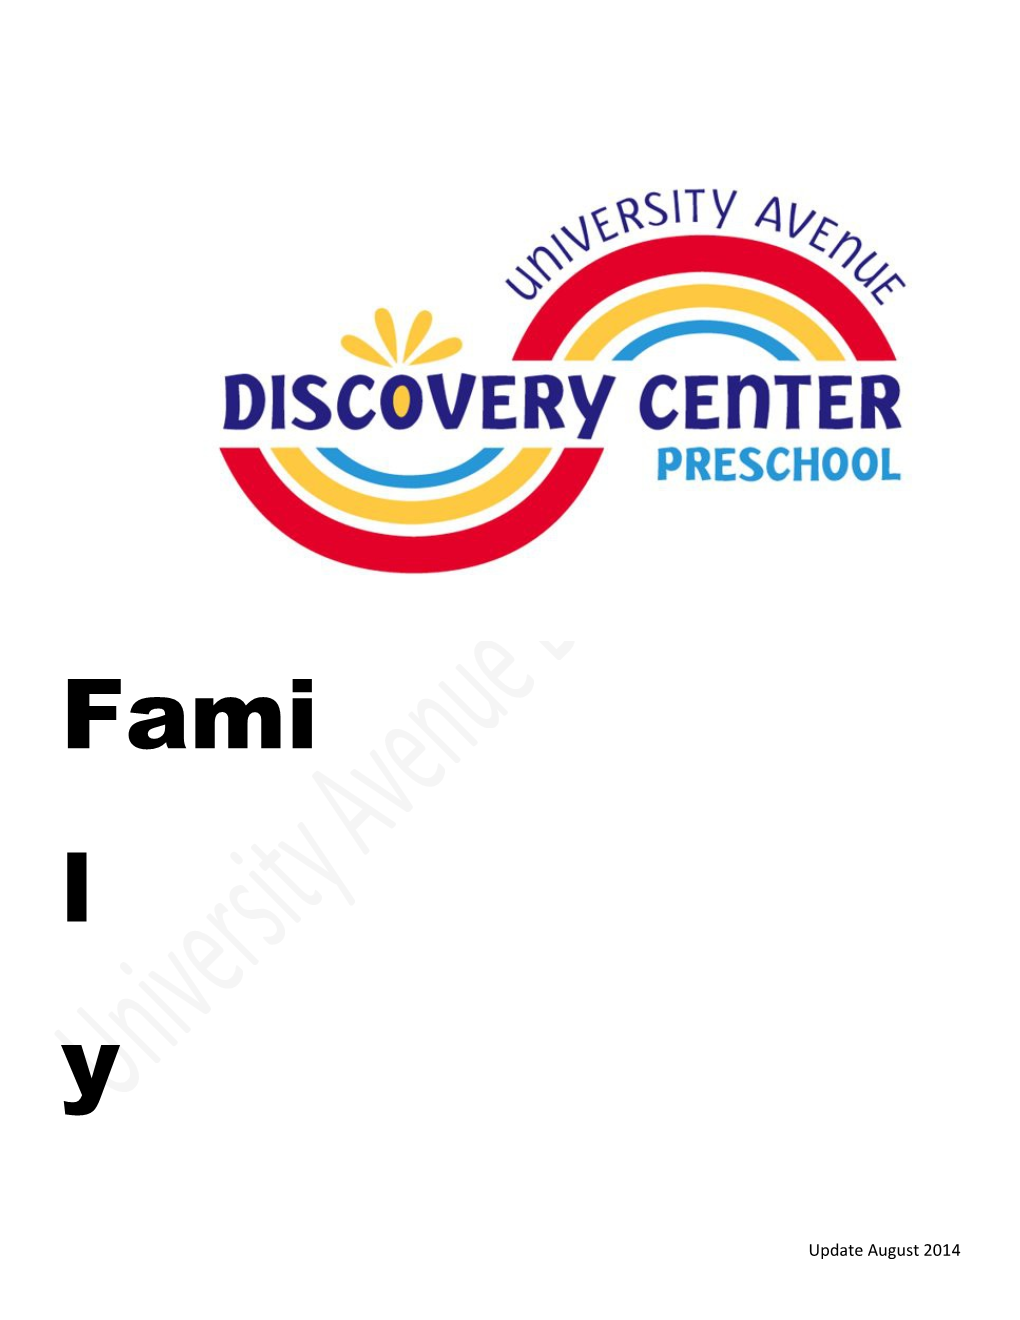 Welcome to University Avenue Discovery Center!